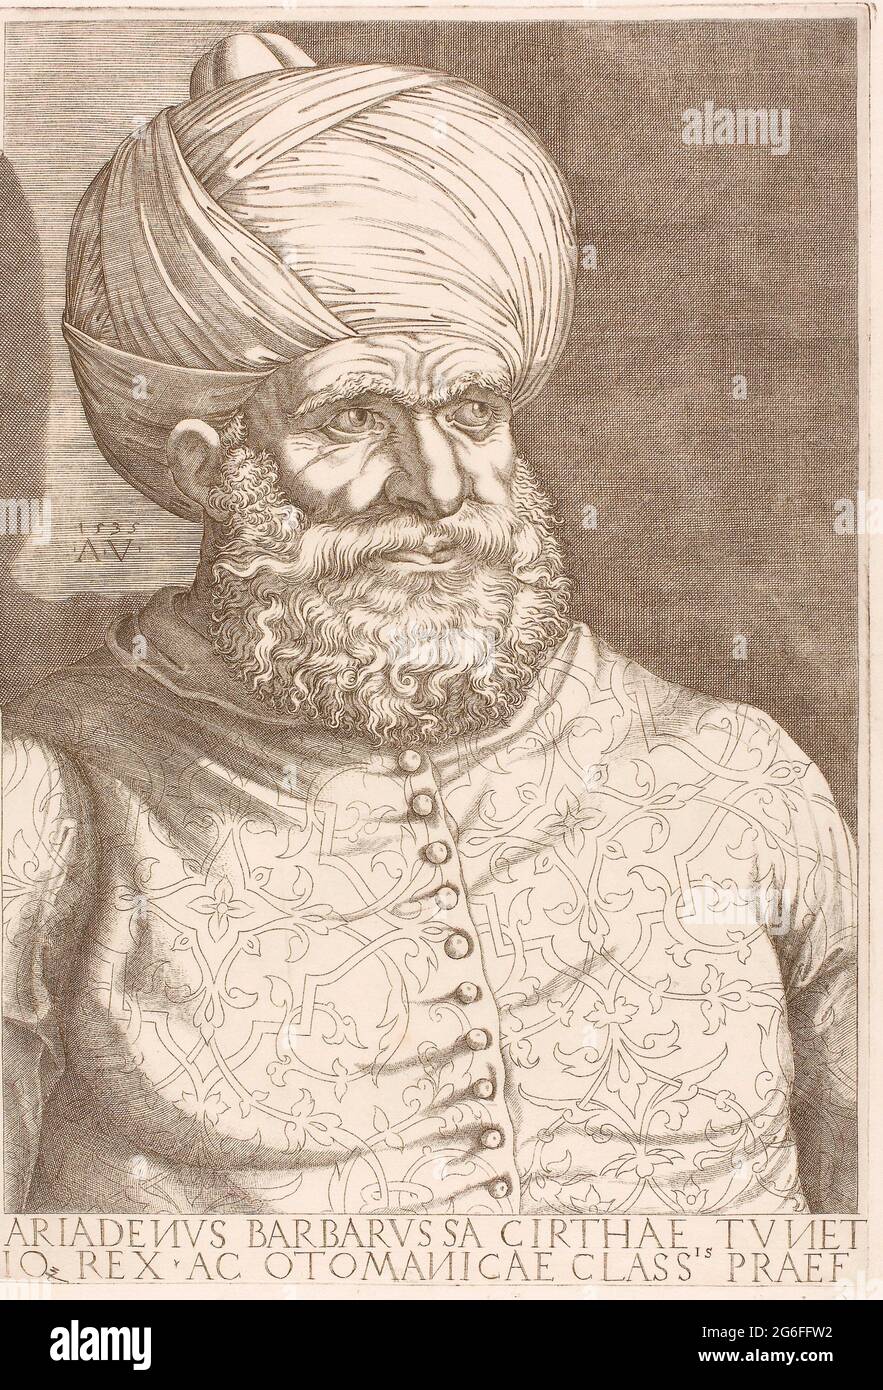 Agostino dei Musi. Portrait of Barbarossa - 1535 - Agostino dei Musi Italian, c. 1490-after 1536. Engraving in black on ivory laid paper. Italy. Stock Photo